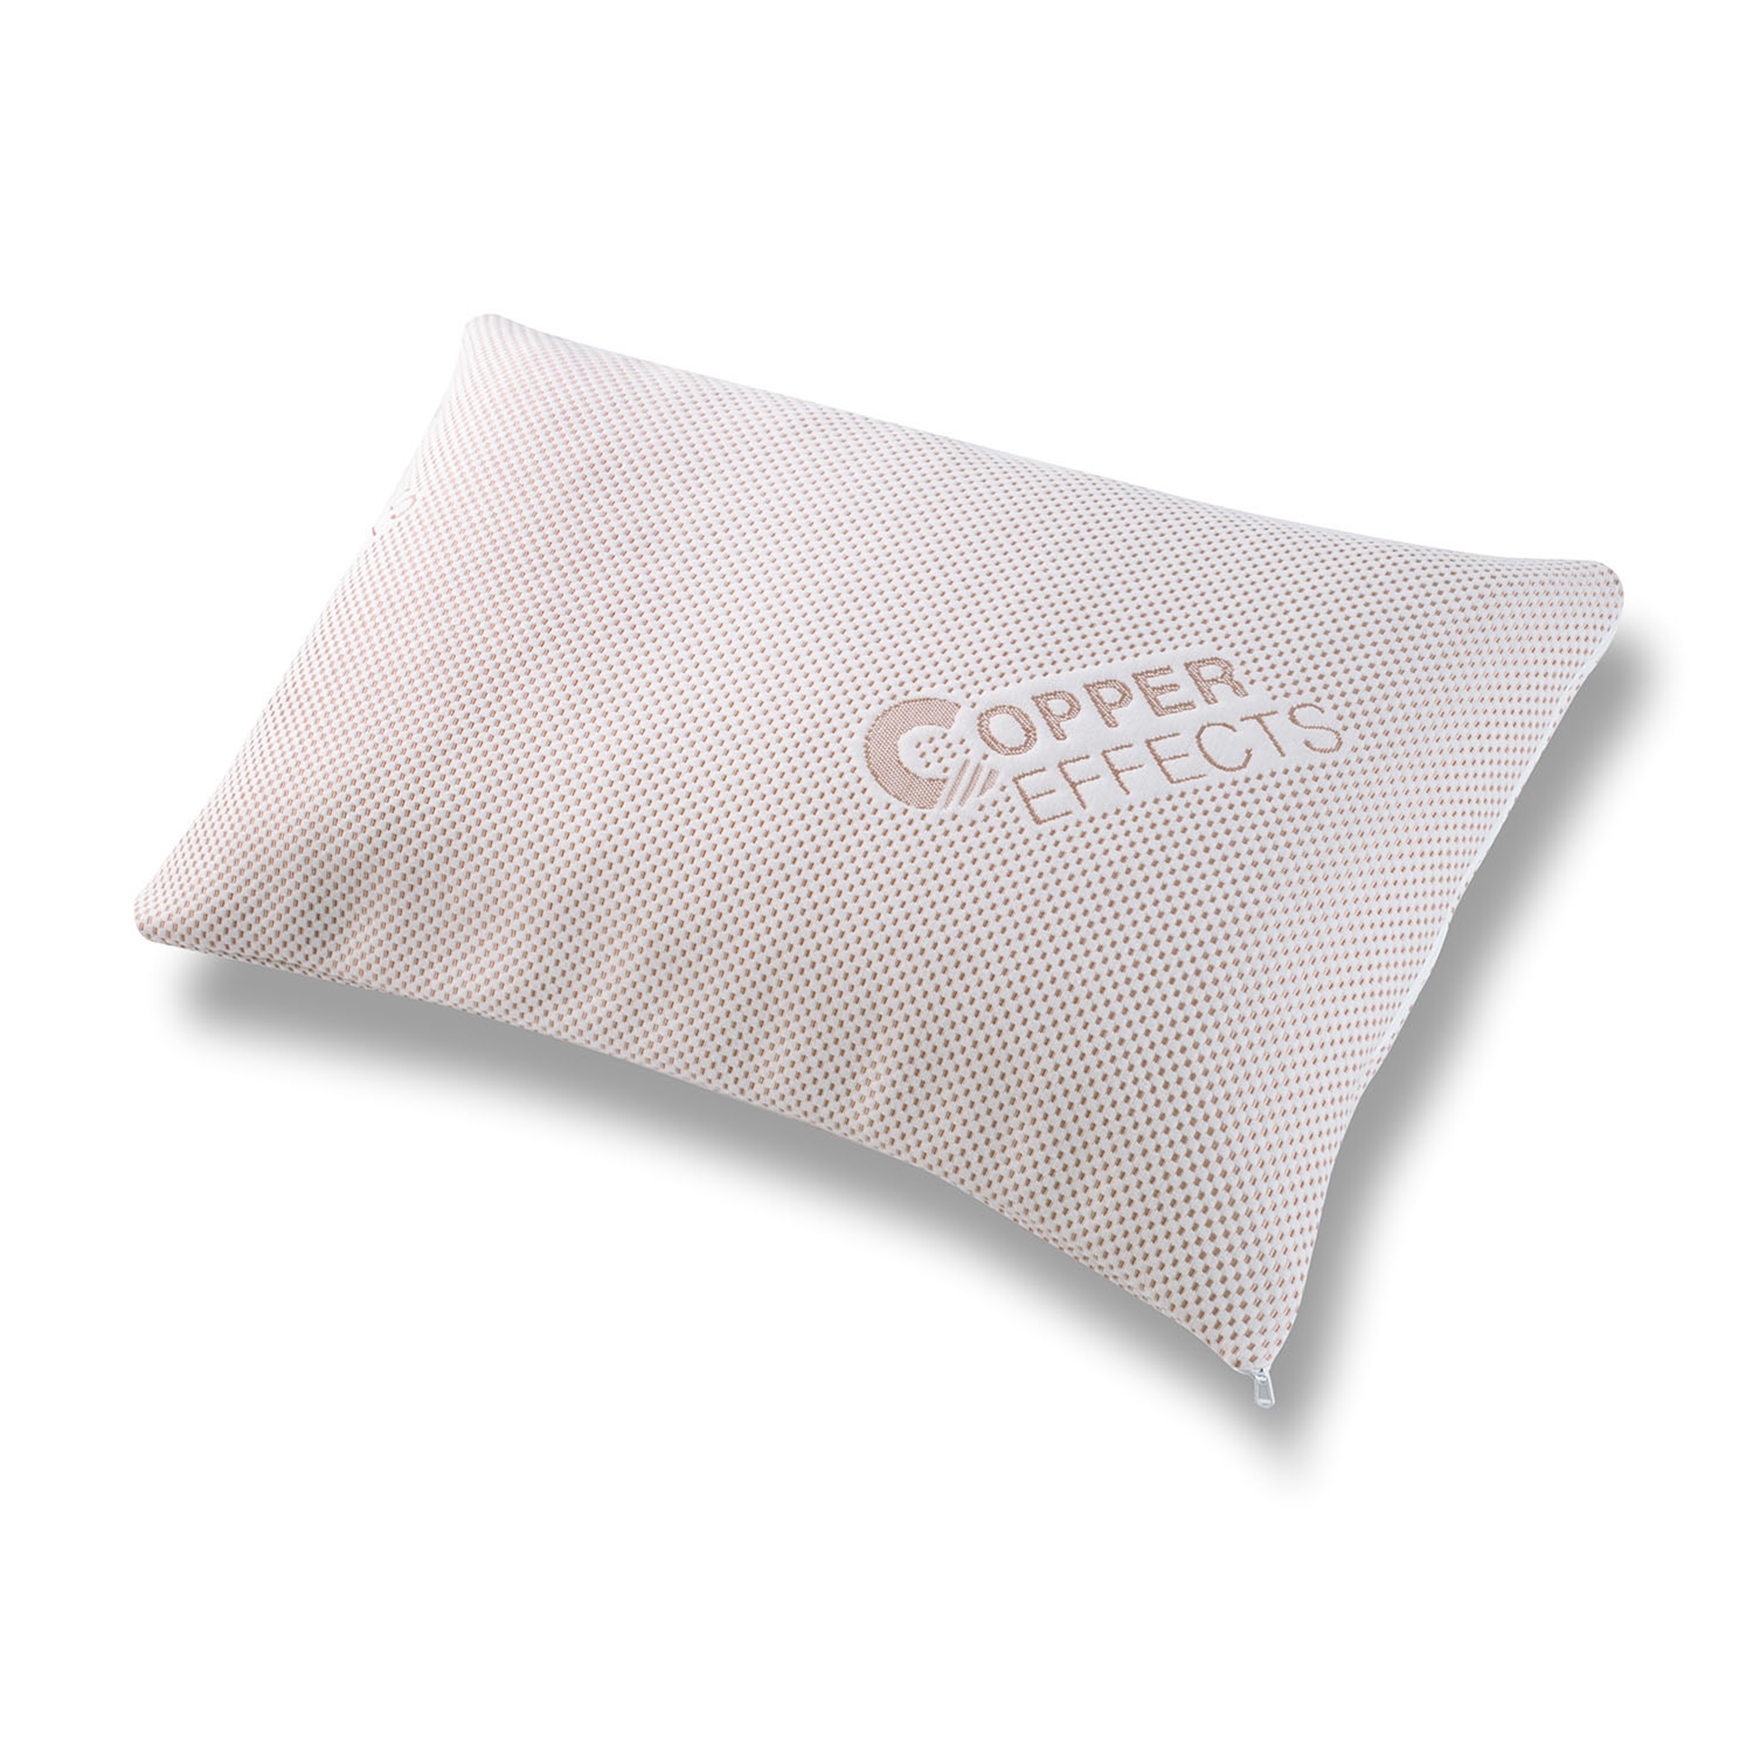 All-In-One Copper Effects Antimicrobial Sleep Pillow, Standard, 